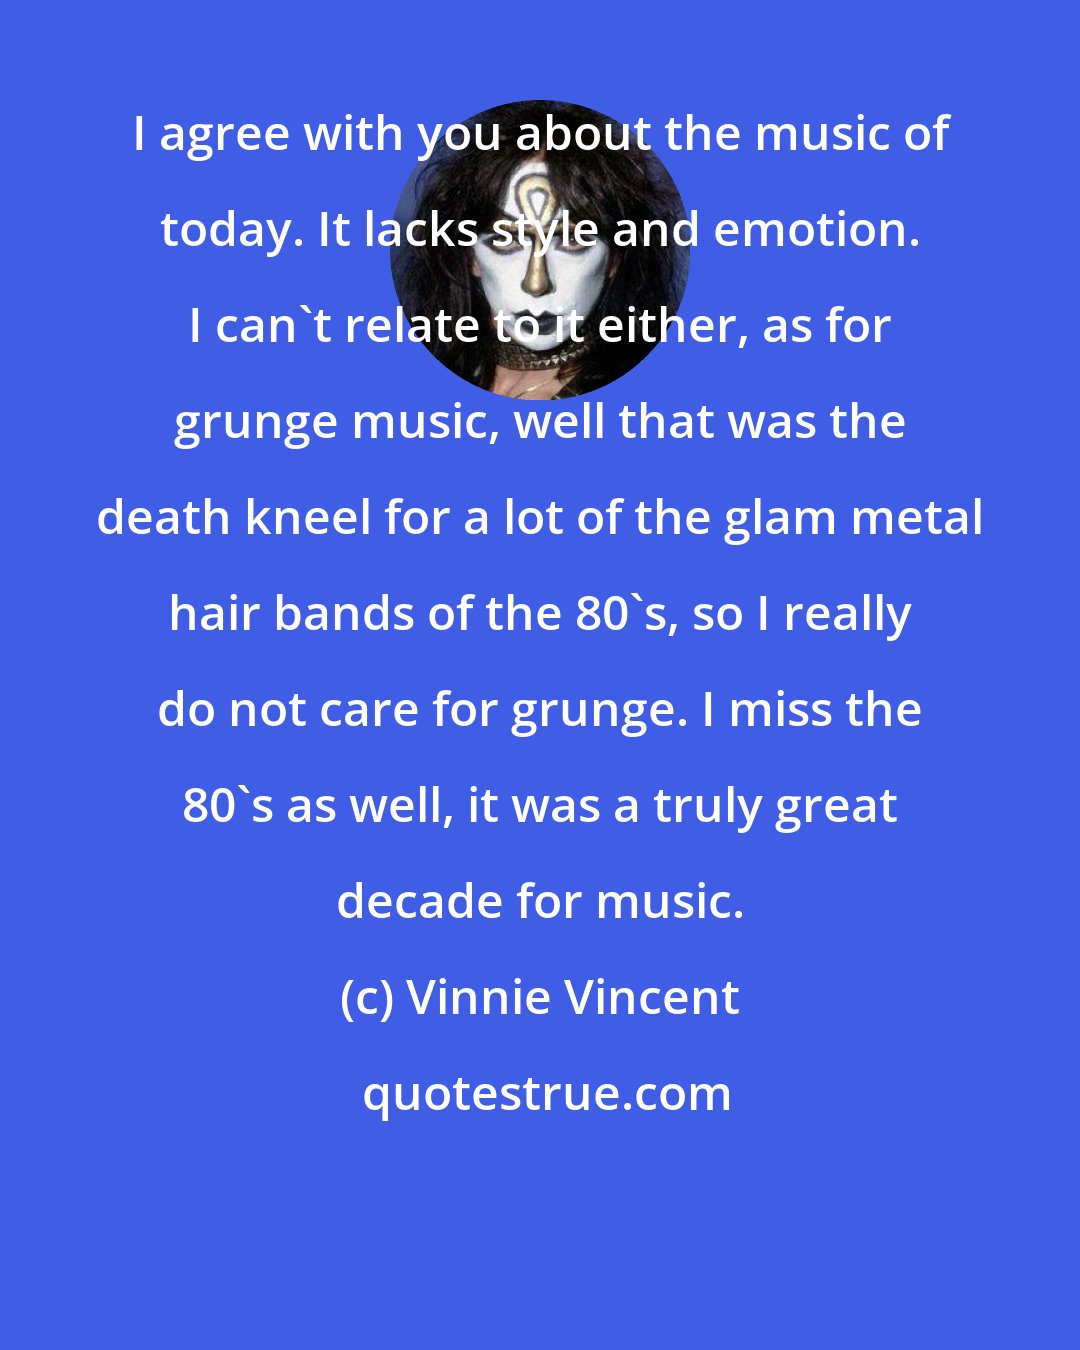 Vinnie Vincent: I agree with you about the music of today. It lacks style and emotion. I can't relate to it either, as for grunge music, well that was the death kneel for a lot of the glam metal hair bands of the 80's, so I really do not care for grunge. I miss the 80's as well, it was a truly great decade for music.